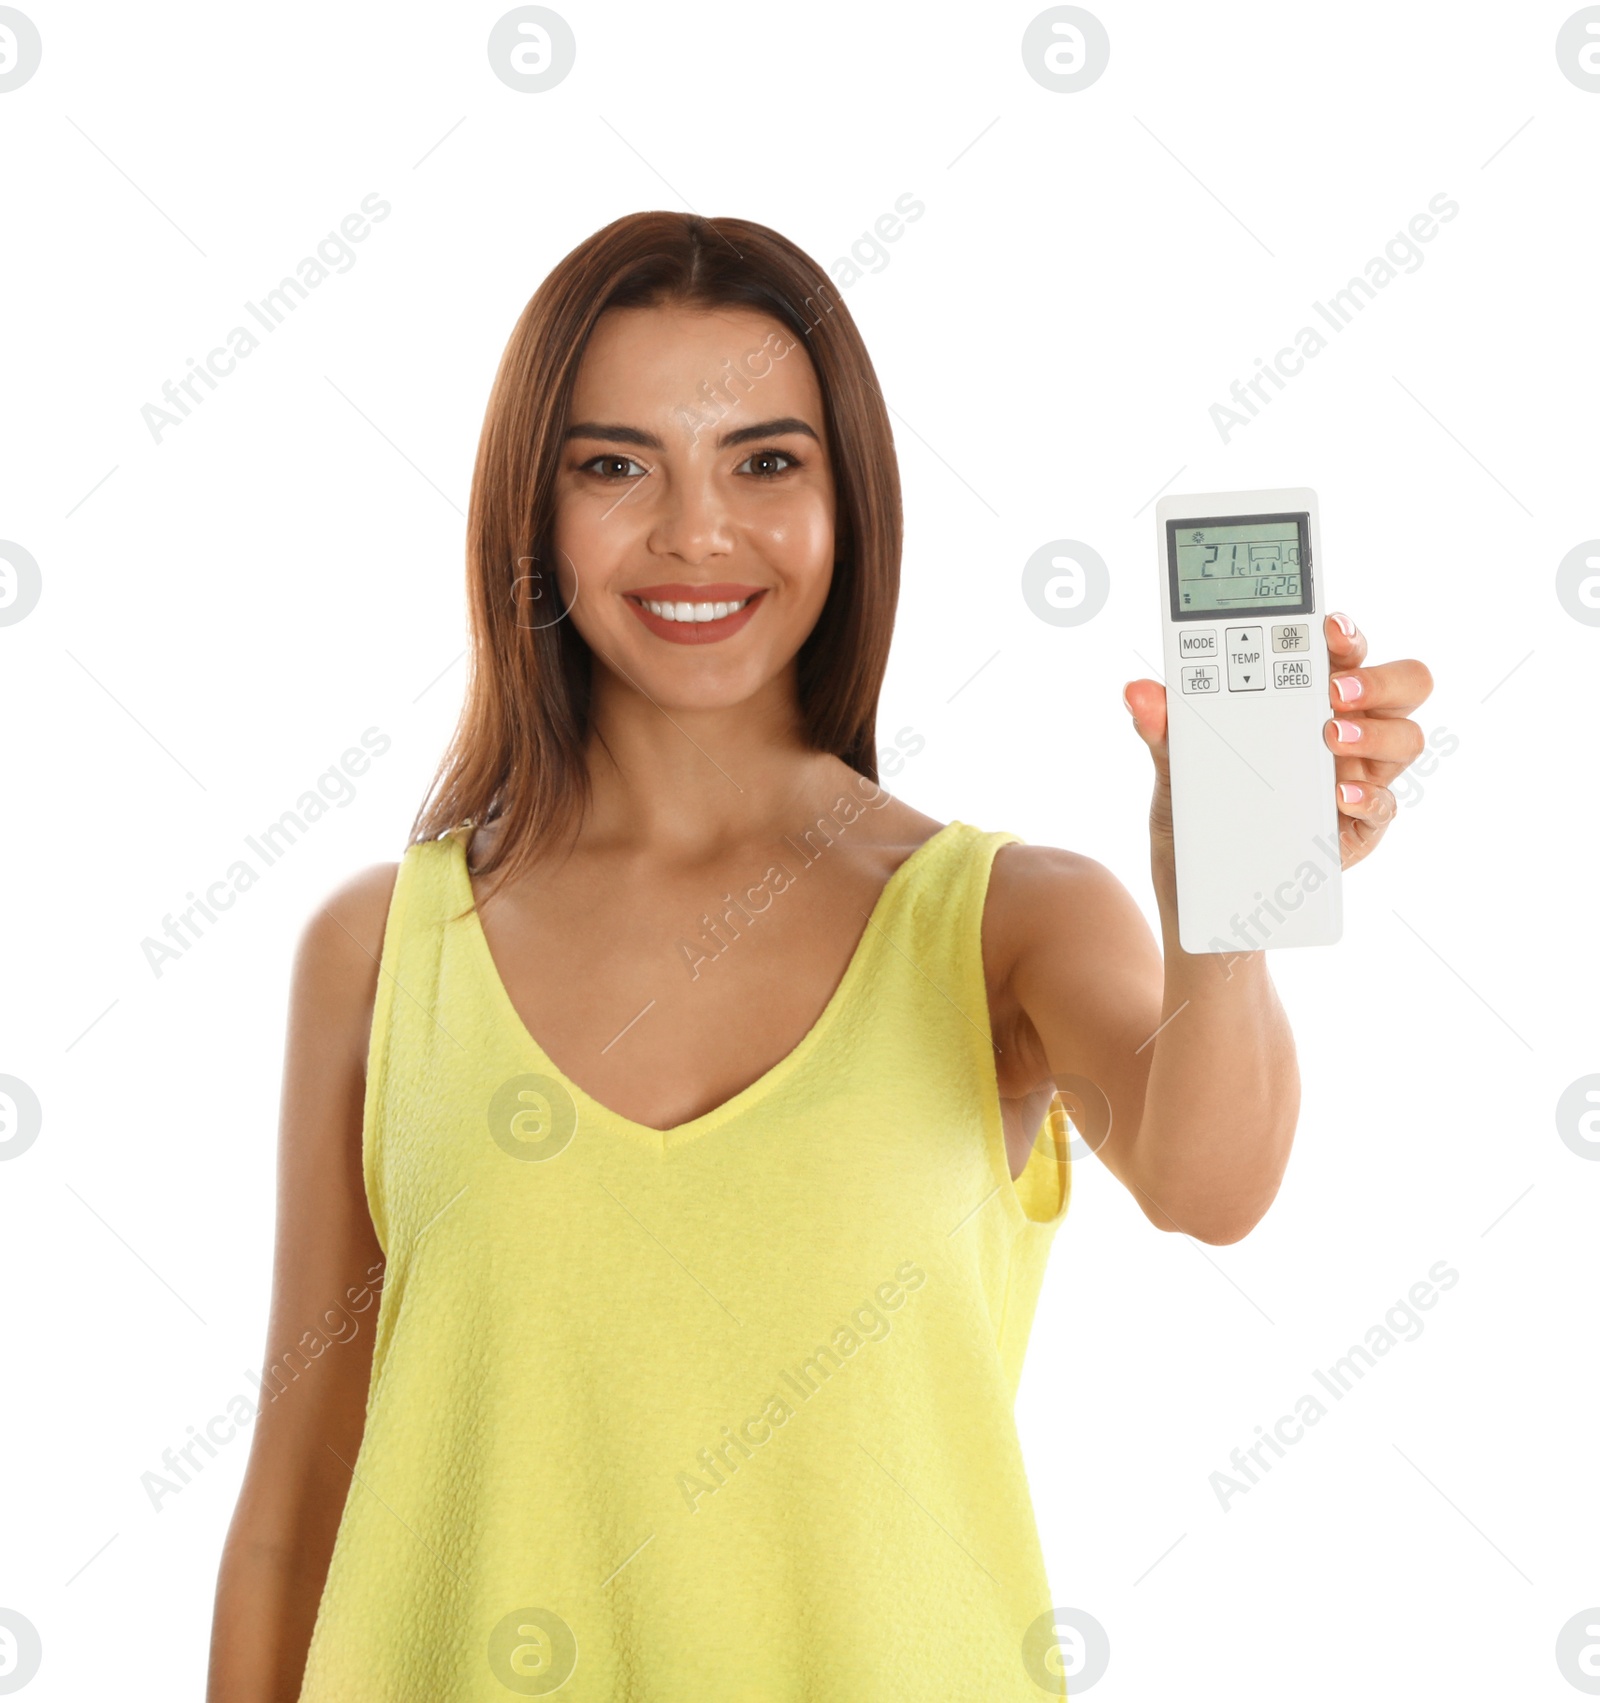 Photo of Young woman with air conditioner remote on white background